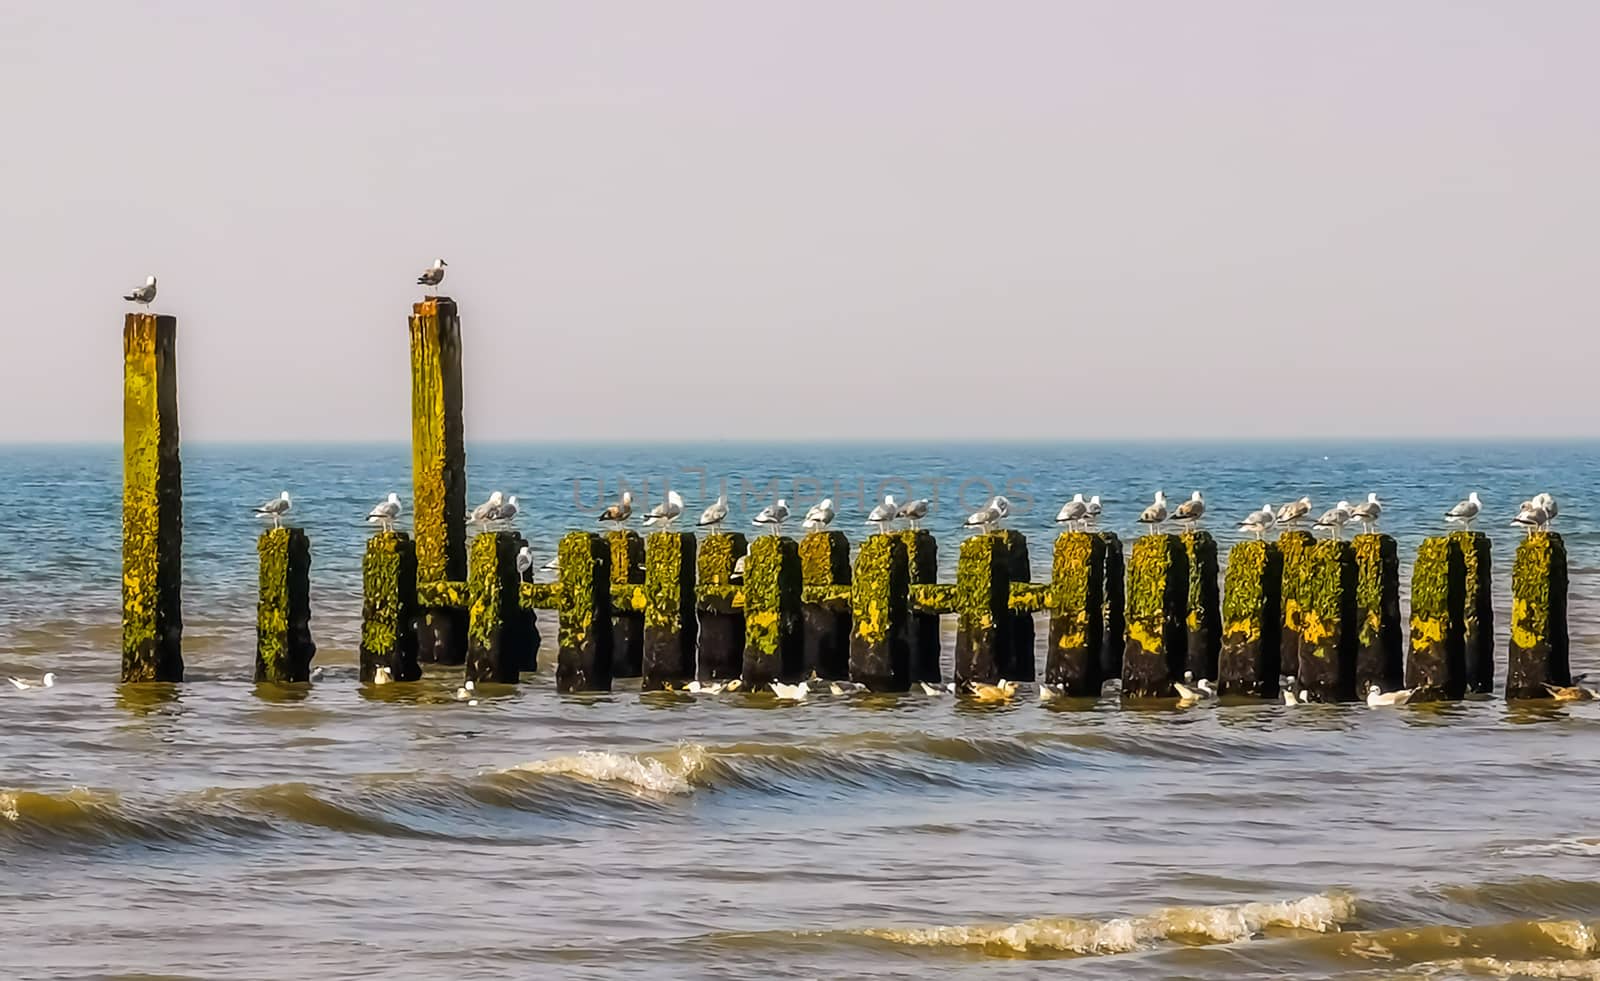 wave breaker poles in the ocean with many seagulls, beach of Domburg, Zeeland, The Netherlands